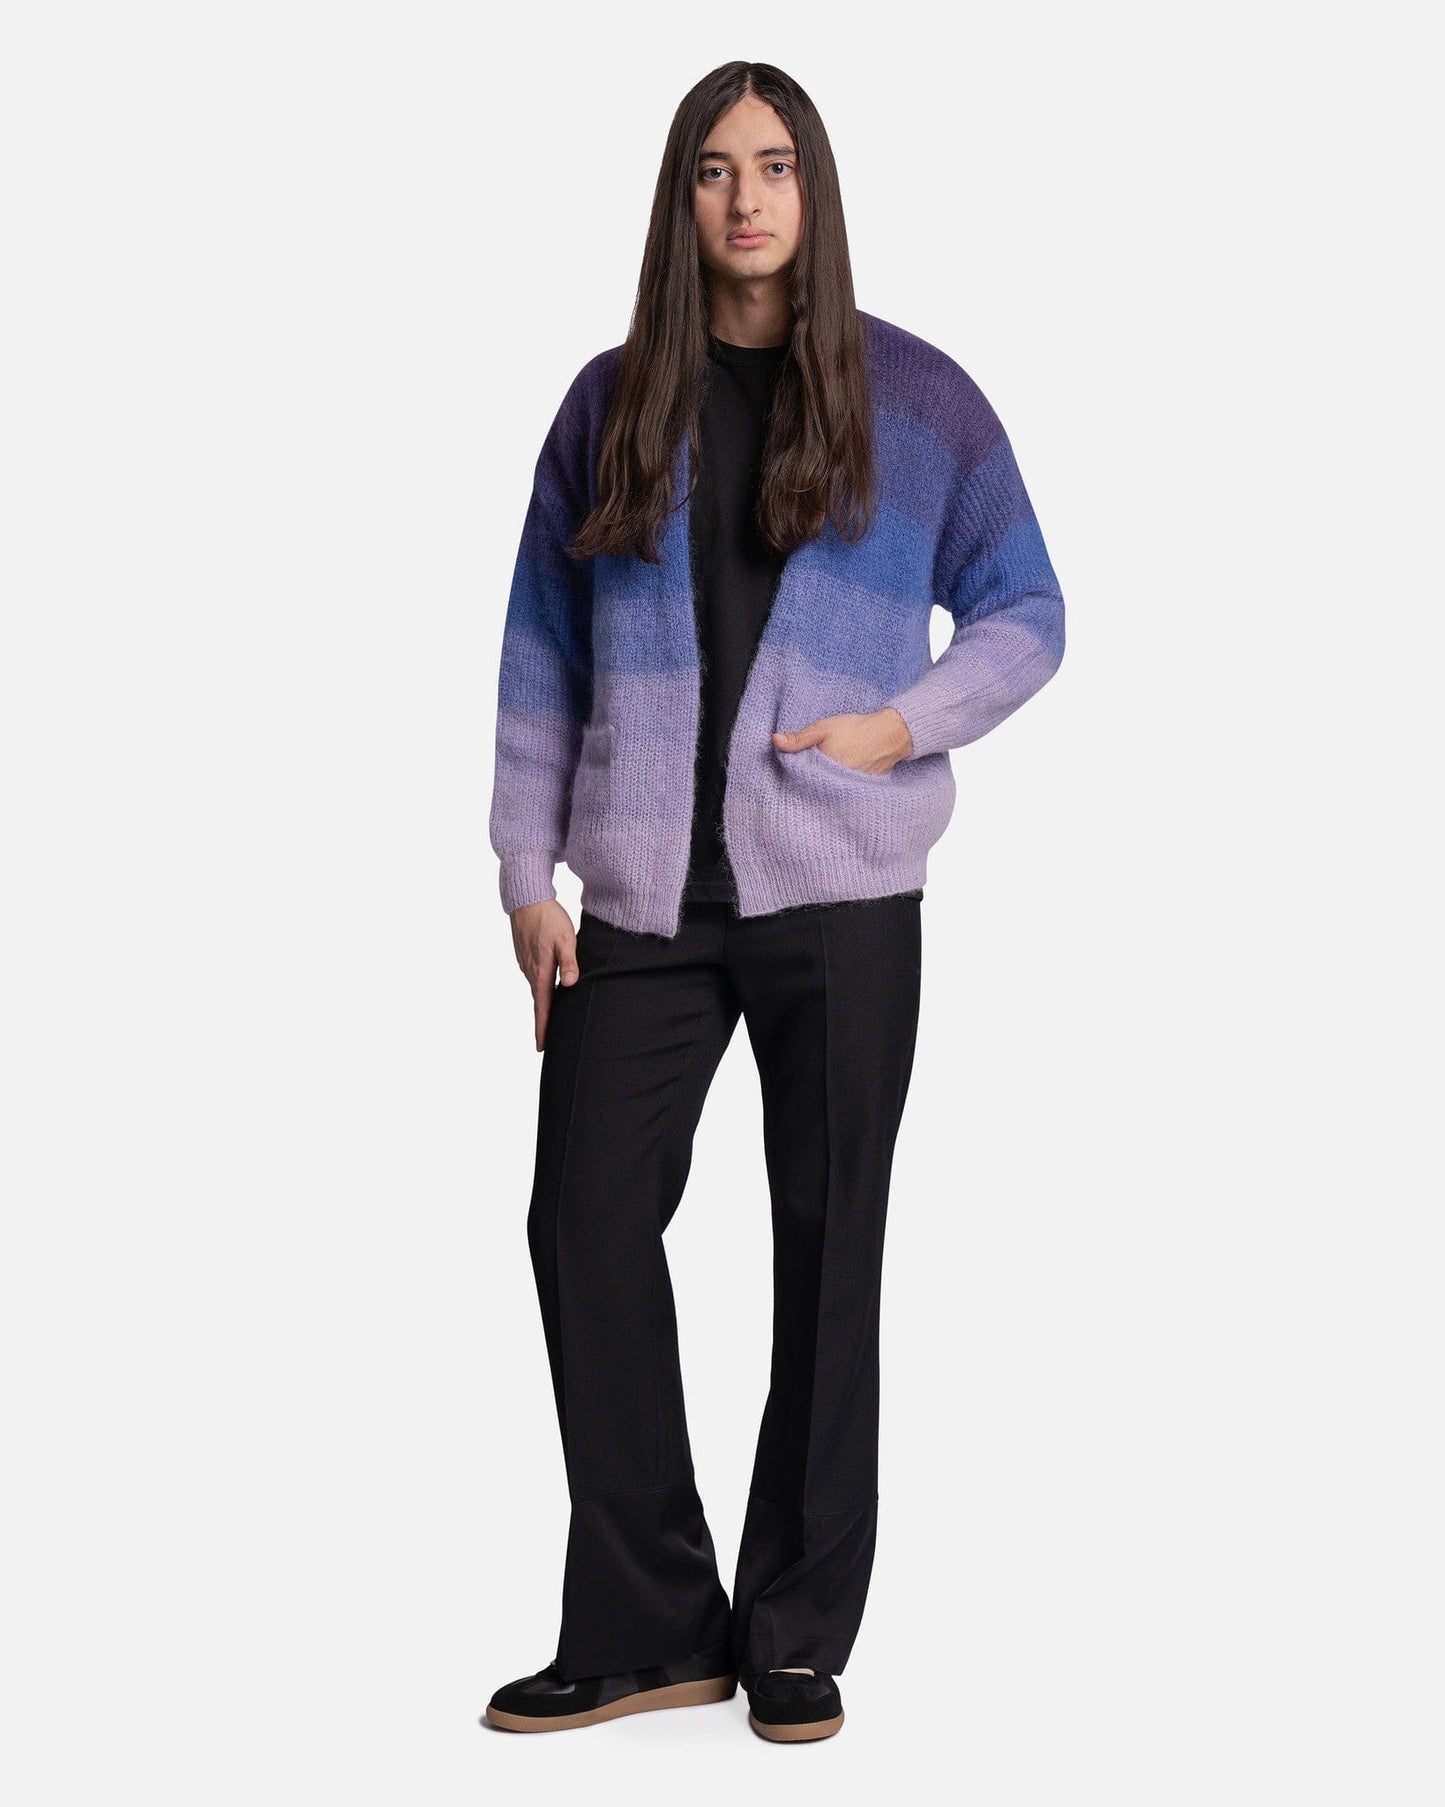 Isabel Marant Homme Men's Sweater Danah Cardigan in Royal Blue/Lilac